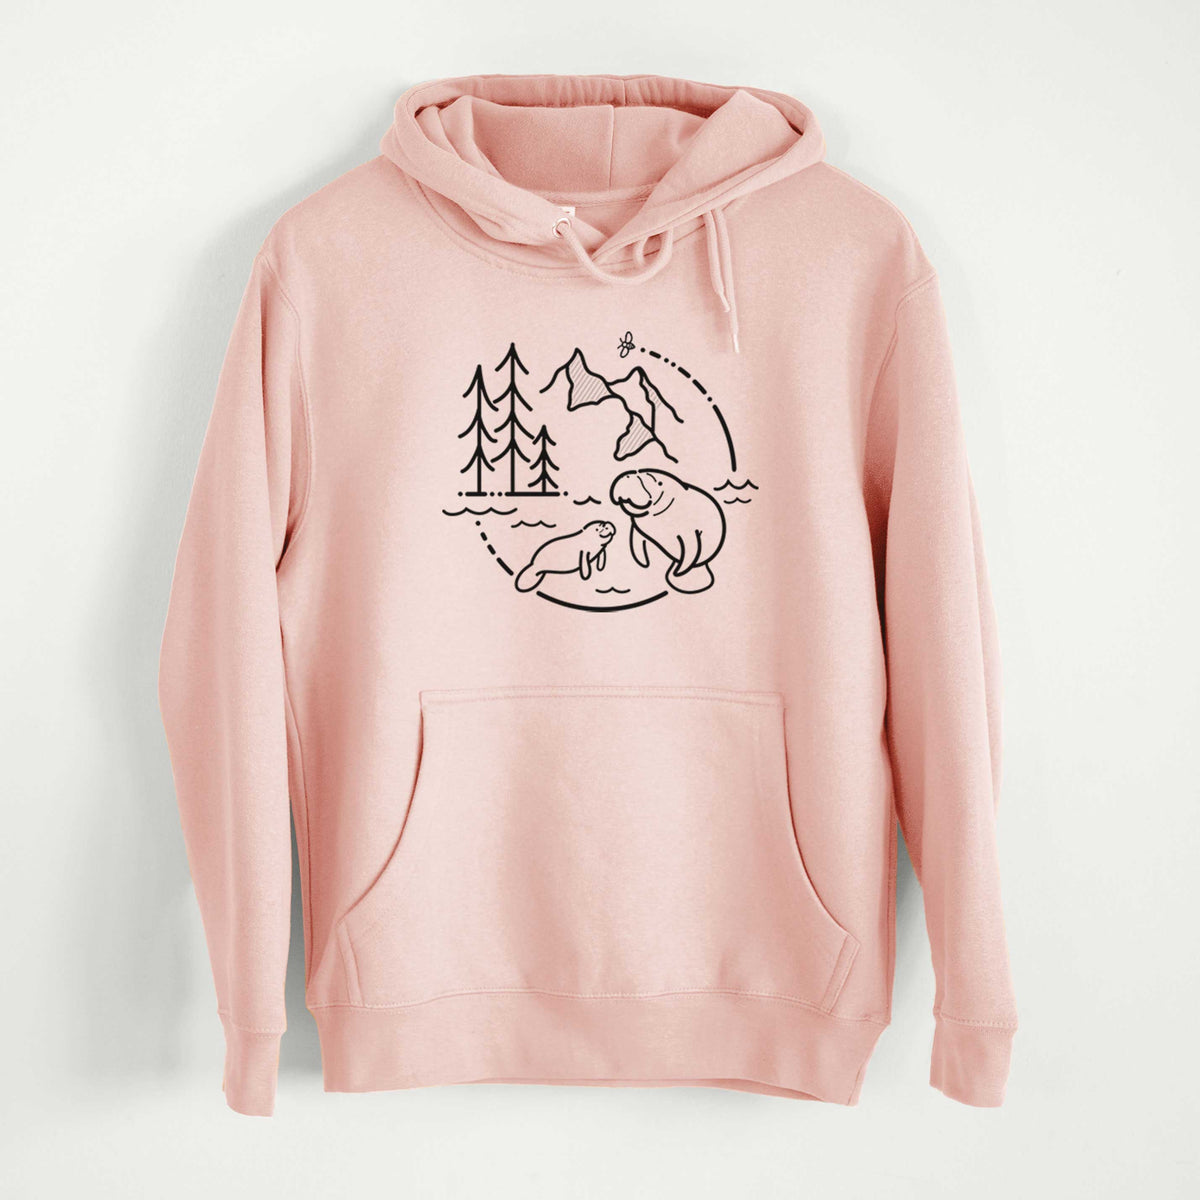 It&#39;s All Connected - Manatee  - Mid-Weight Unisex Premium Blend Hoodie